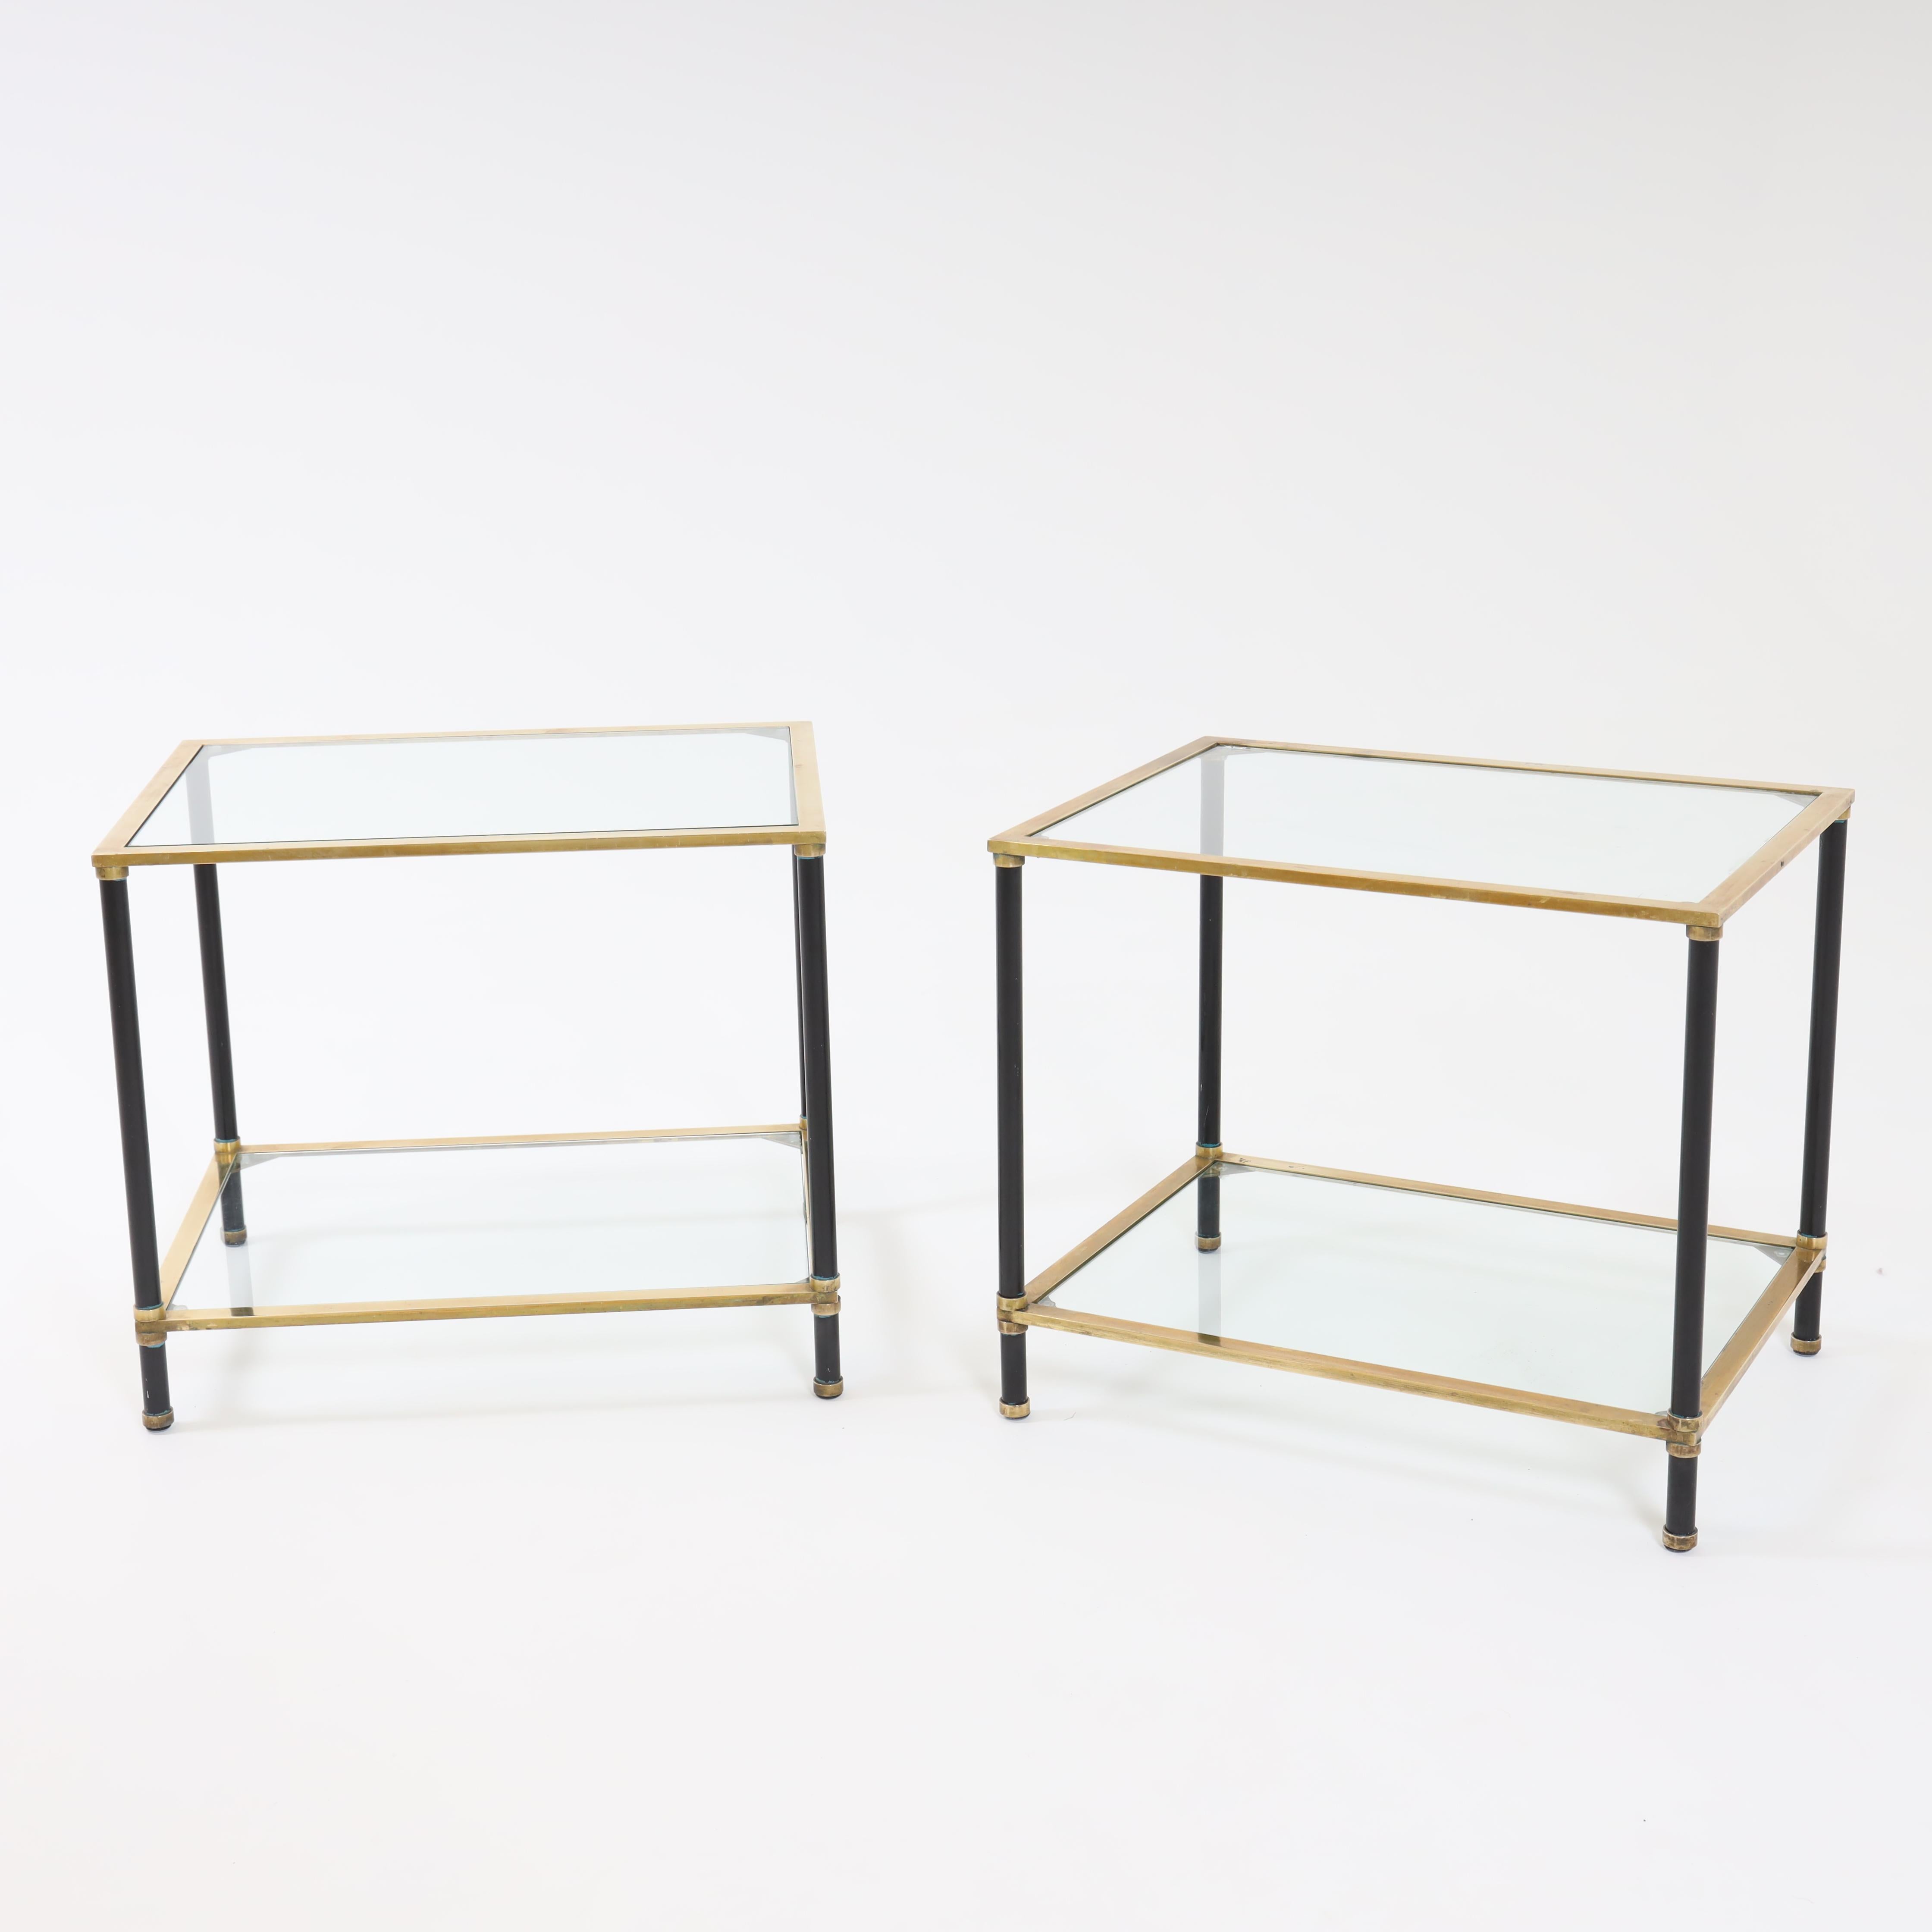 Mid-20th Century Pair of Italian Modernist Two Tier Side Tables